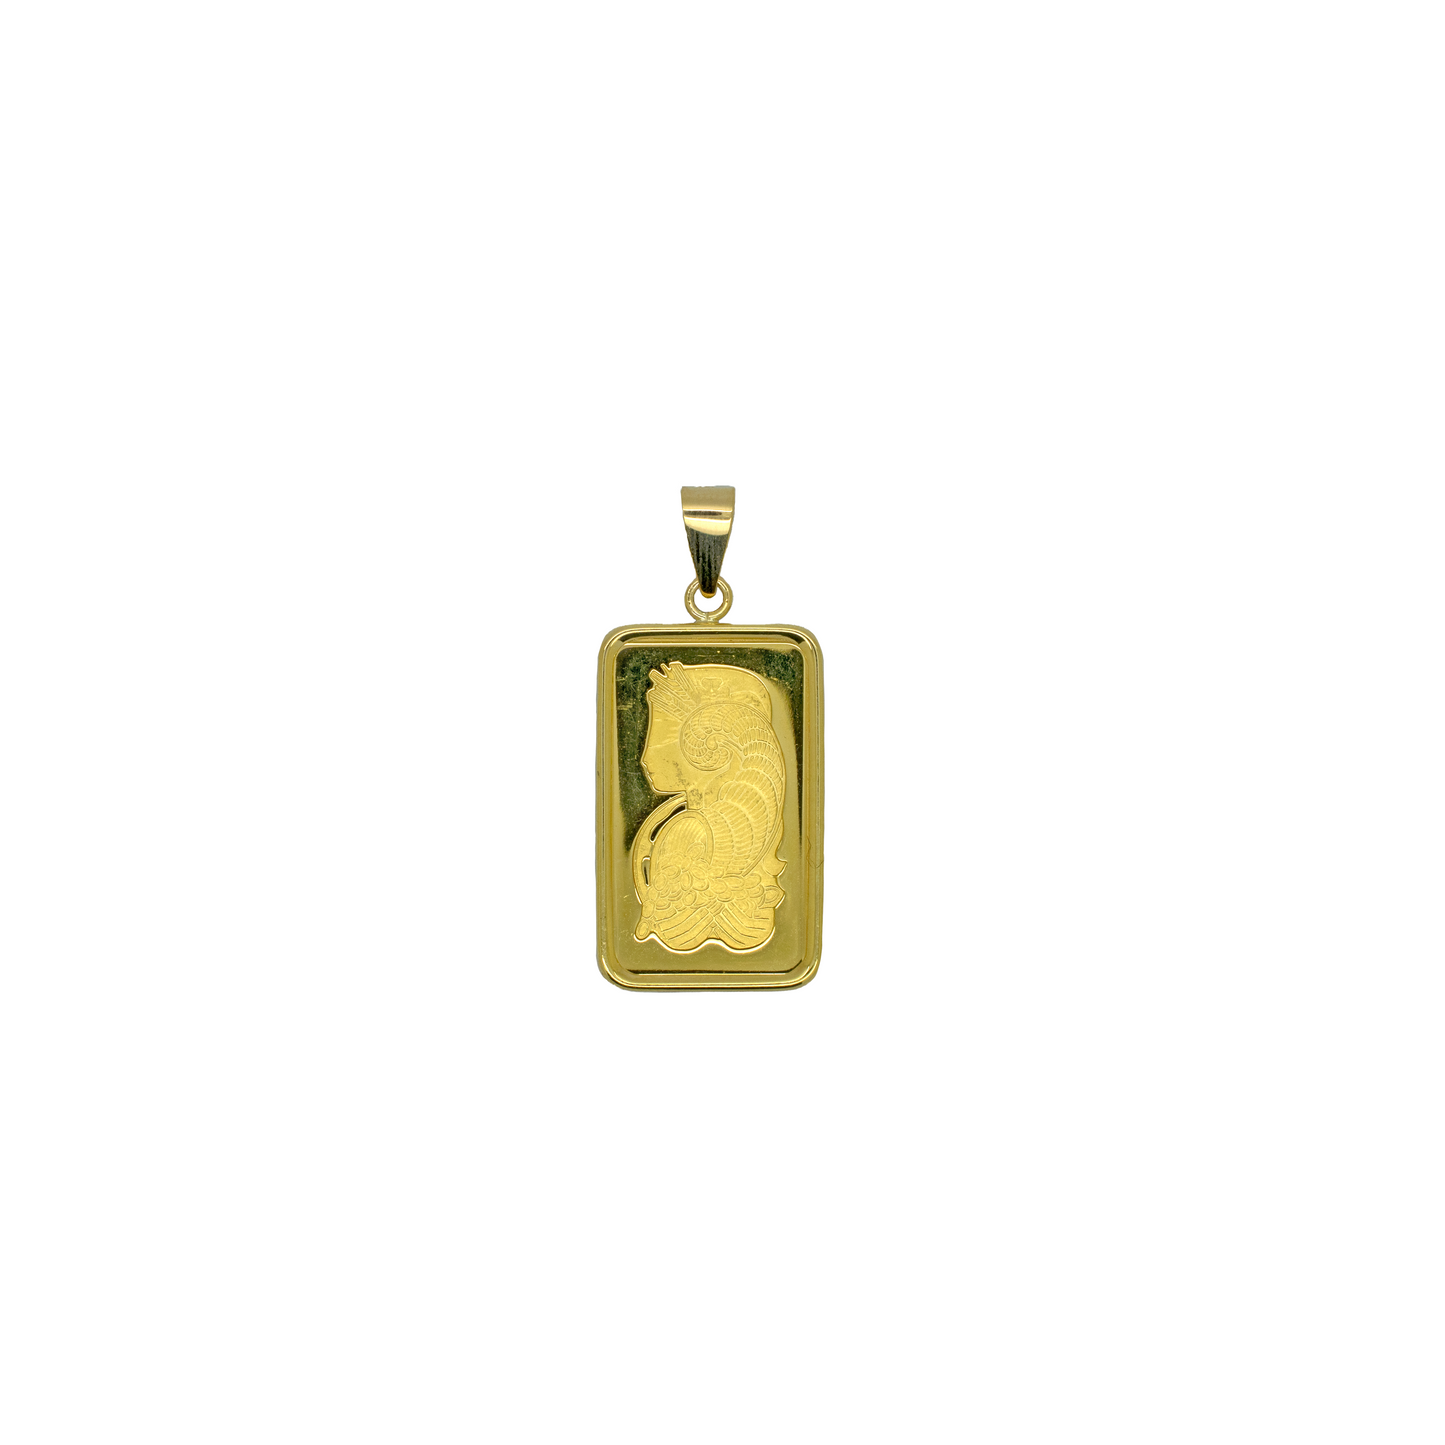 24k Gold Pamp 10g with 14k Border